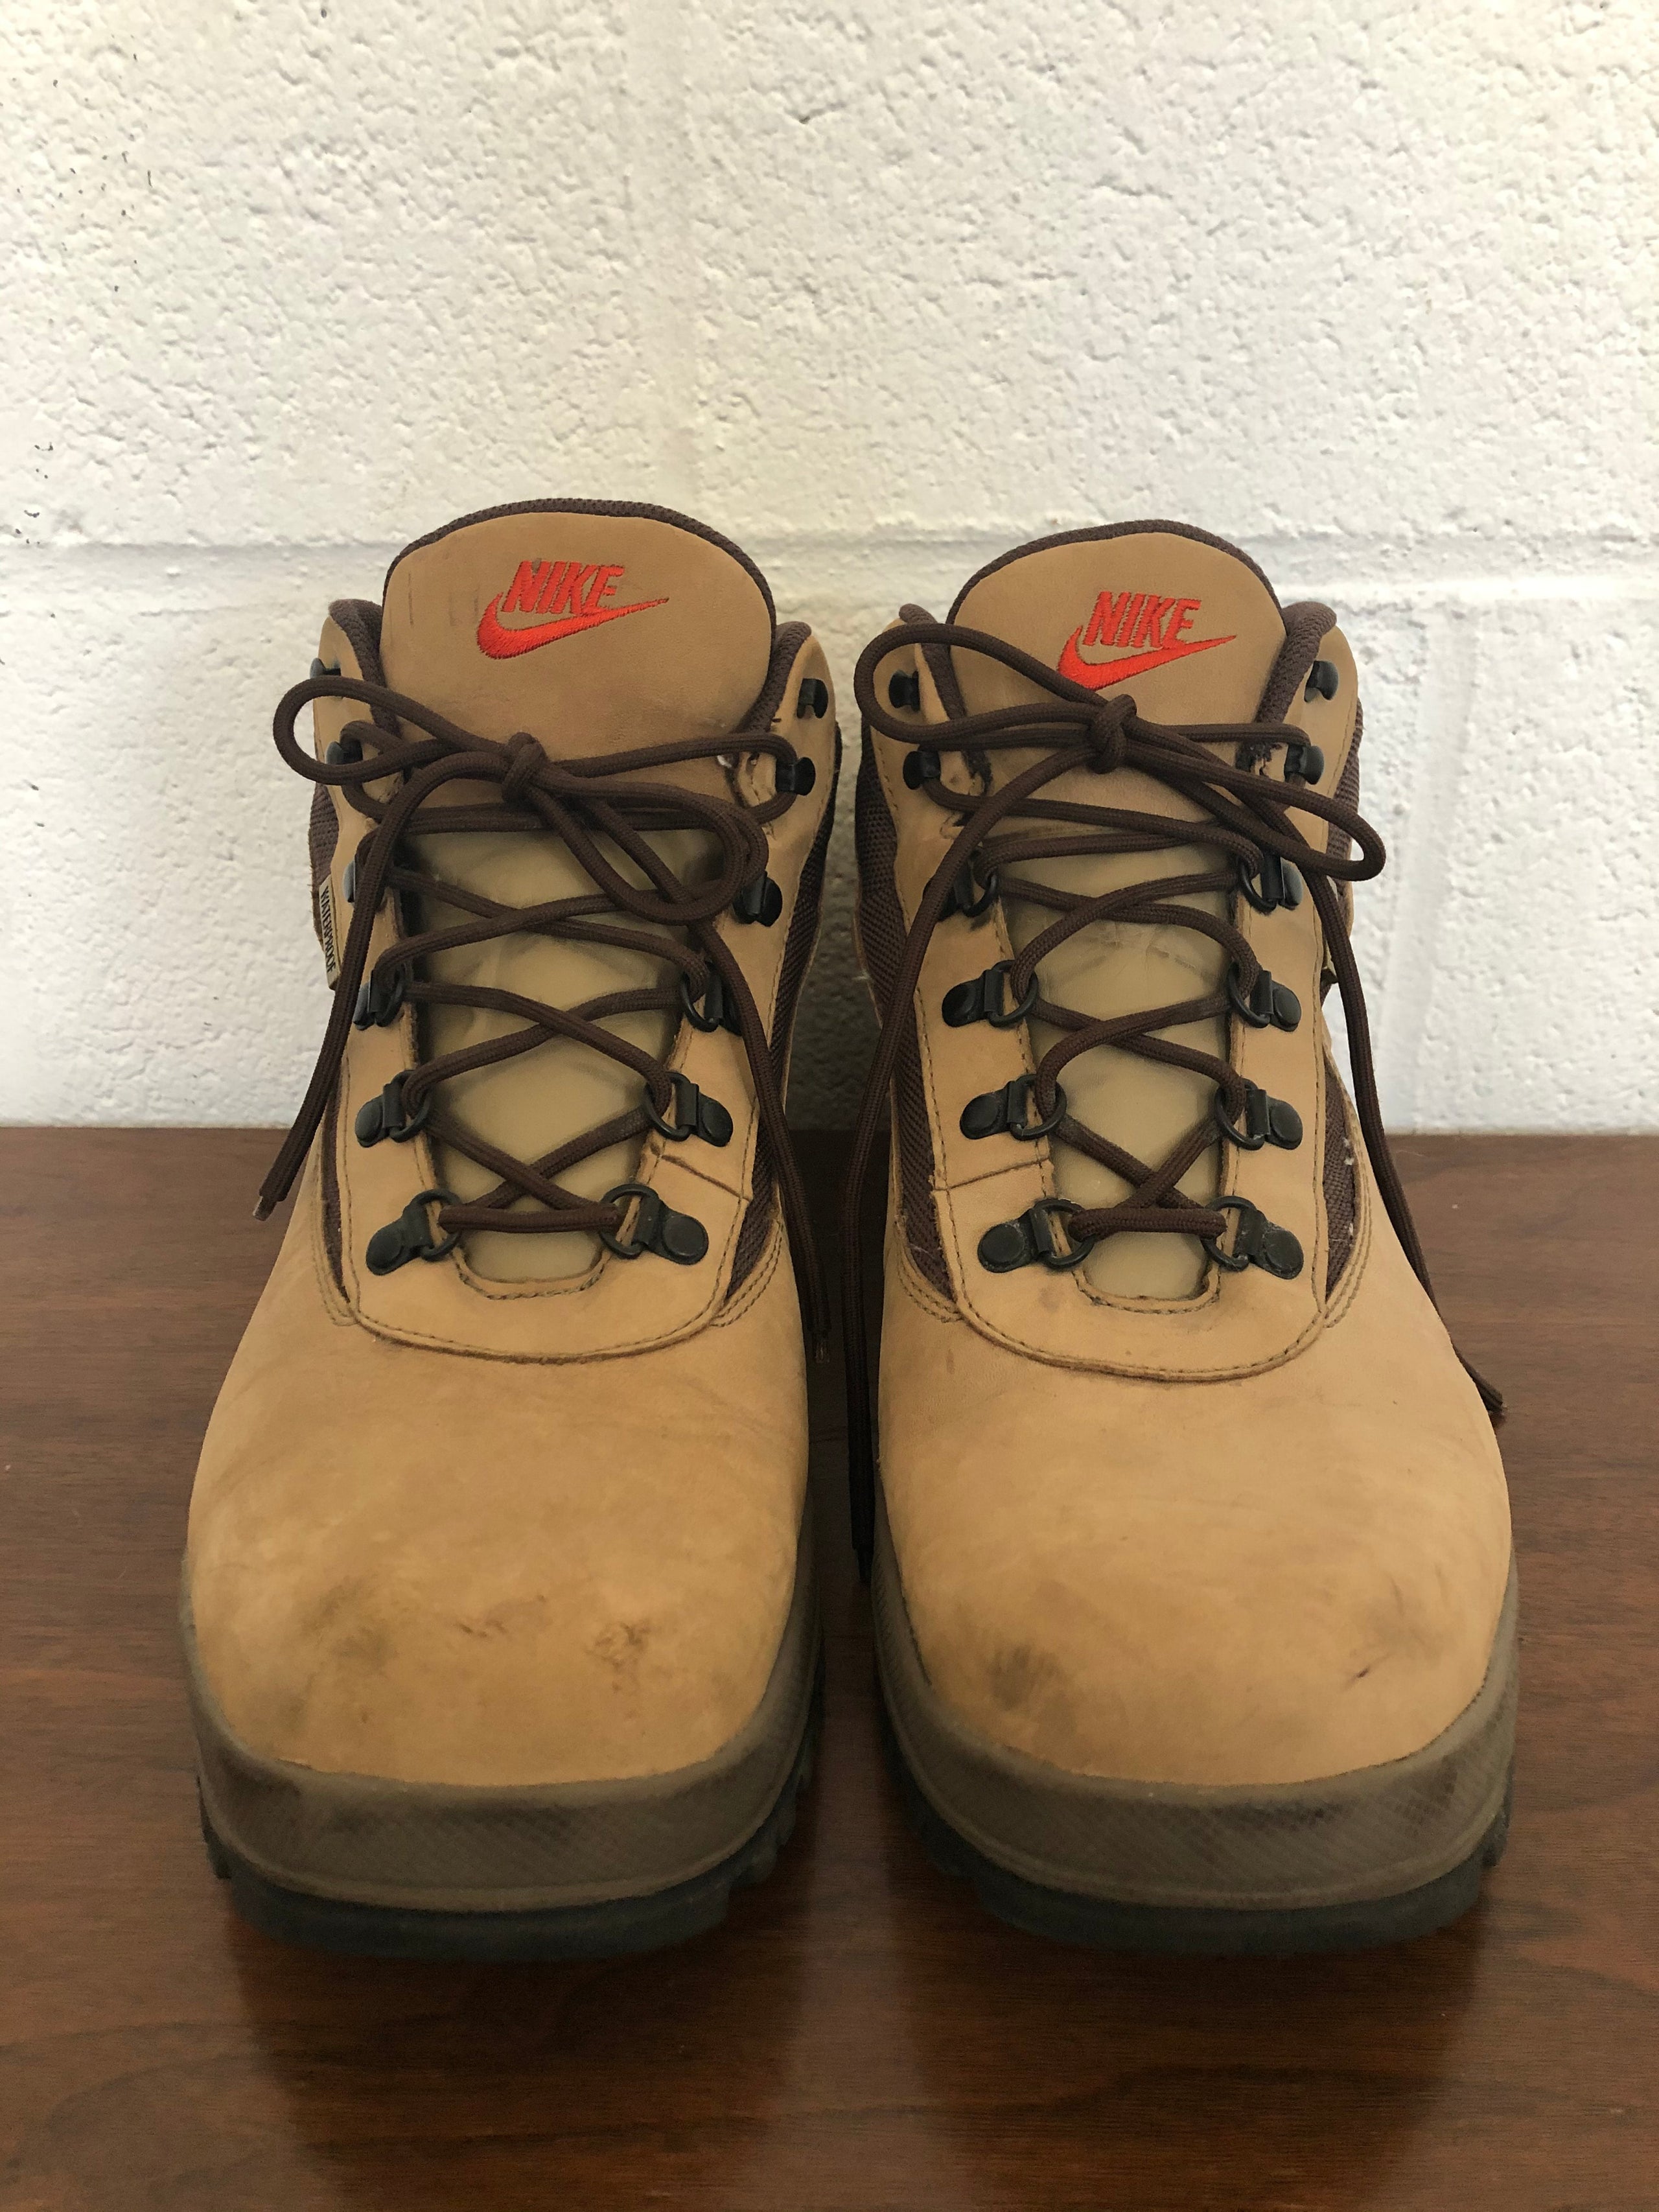 Shoes - Nike Hiking Boots